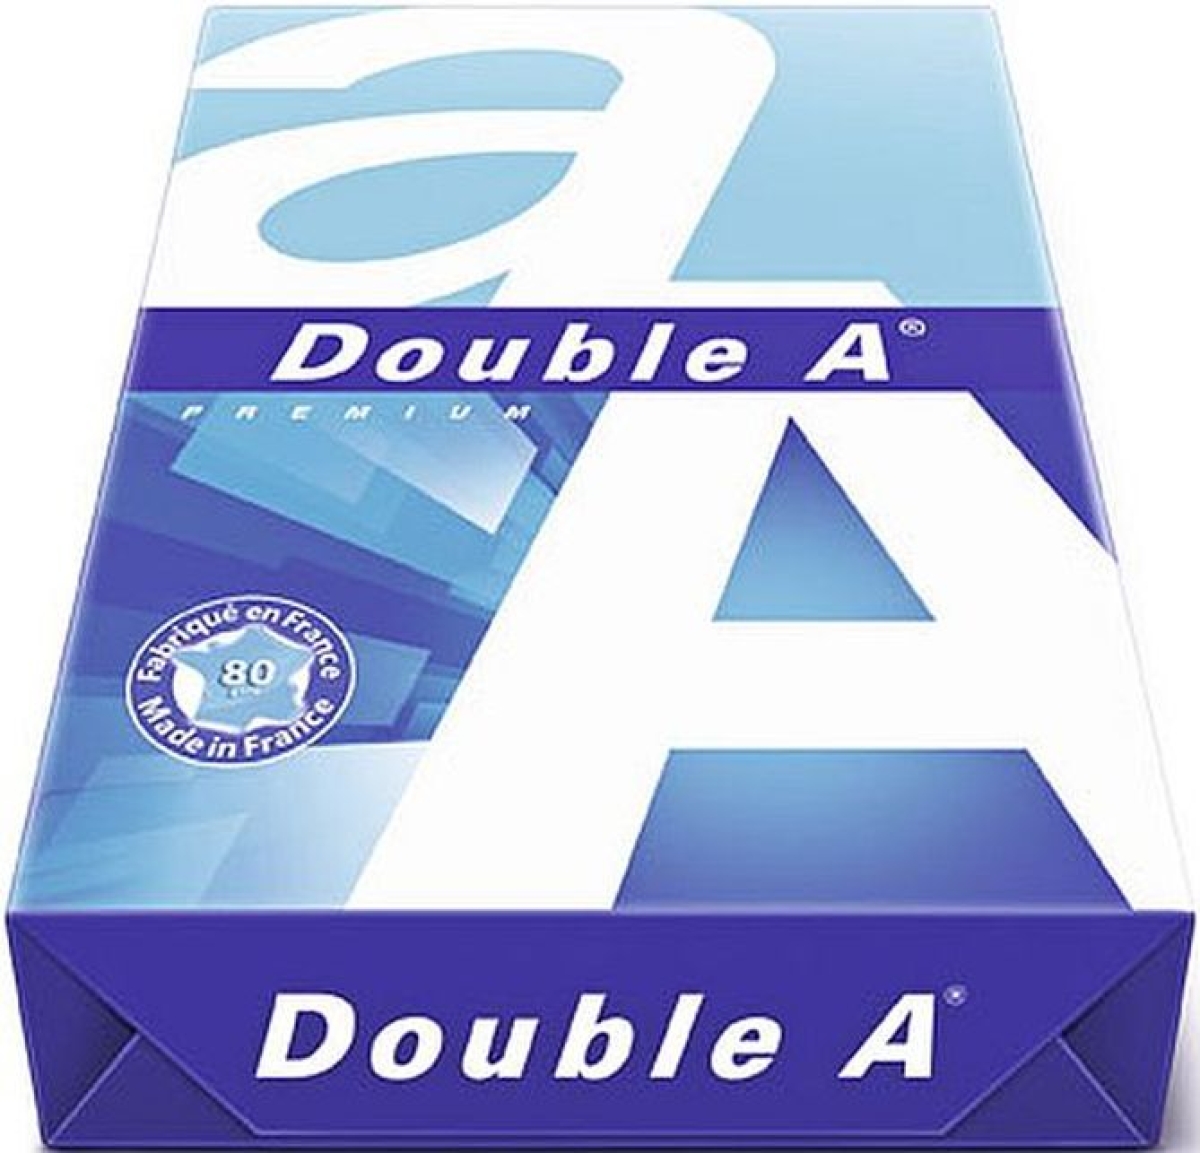 InapaCopy paper Double A A4 80g 500 sheets white-Price for 500SheetArticle-No: 3613630000042